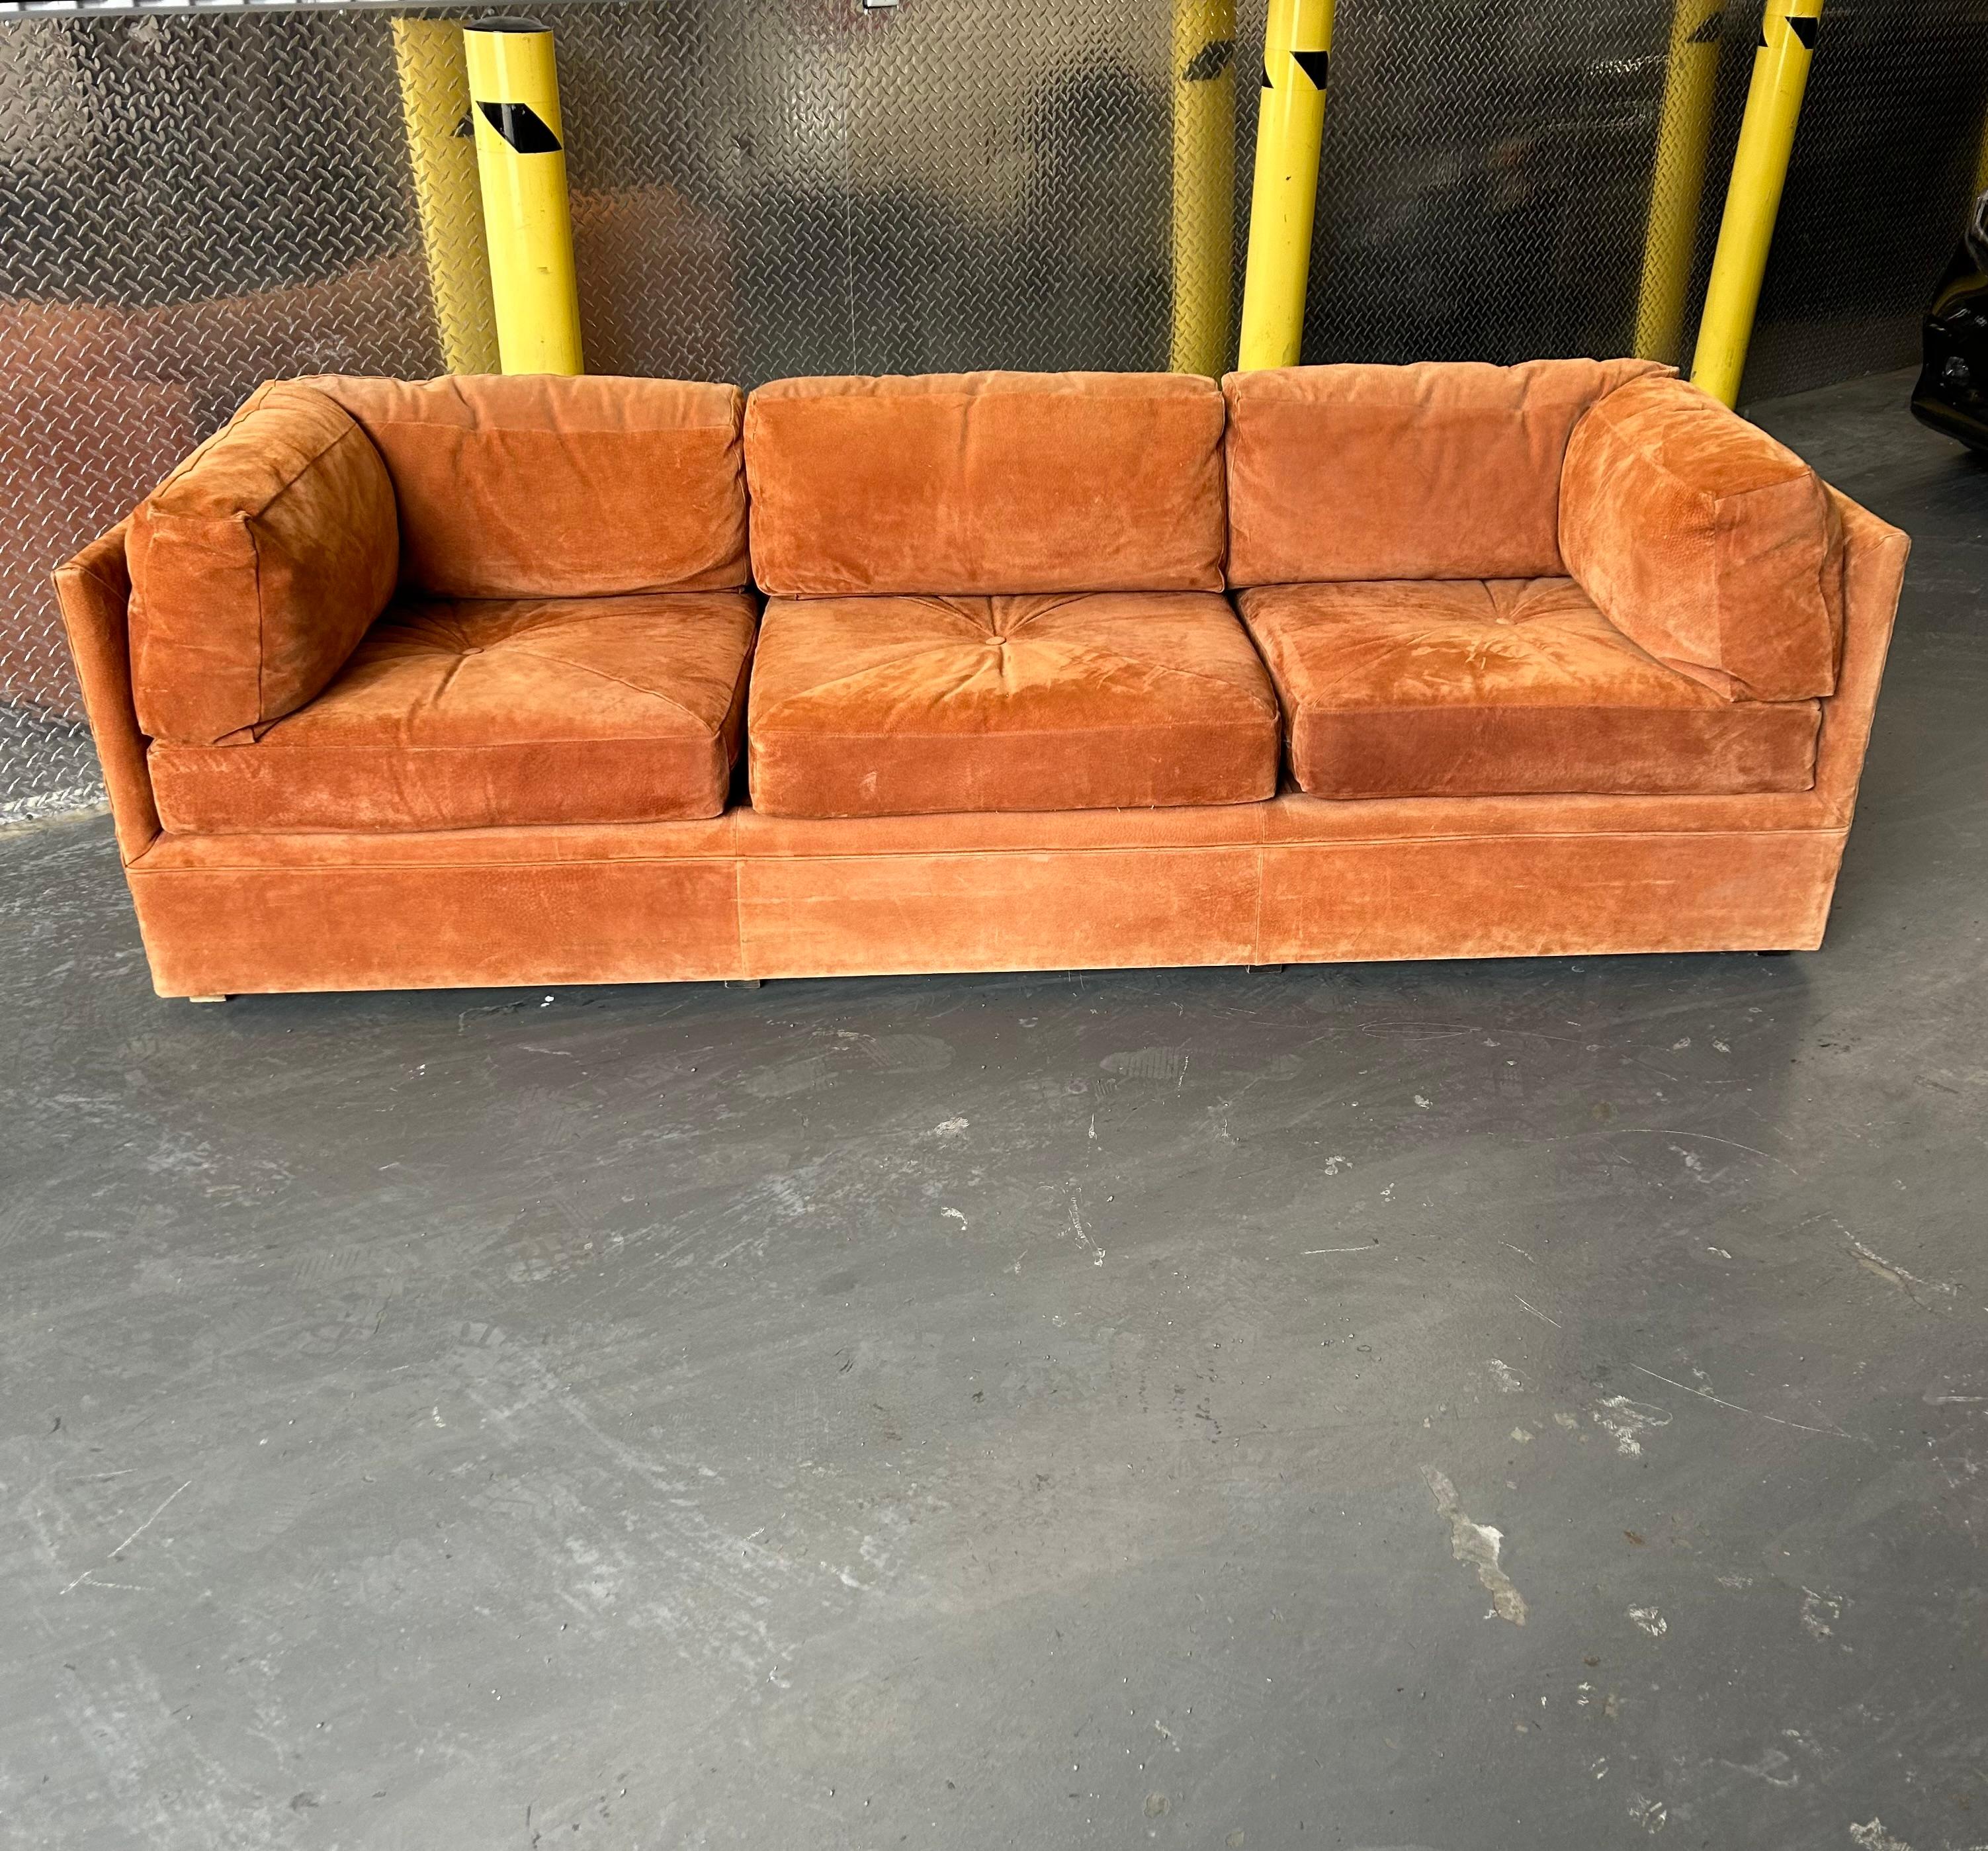 Late 20th Century Vintage Suede Leather Sofa